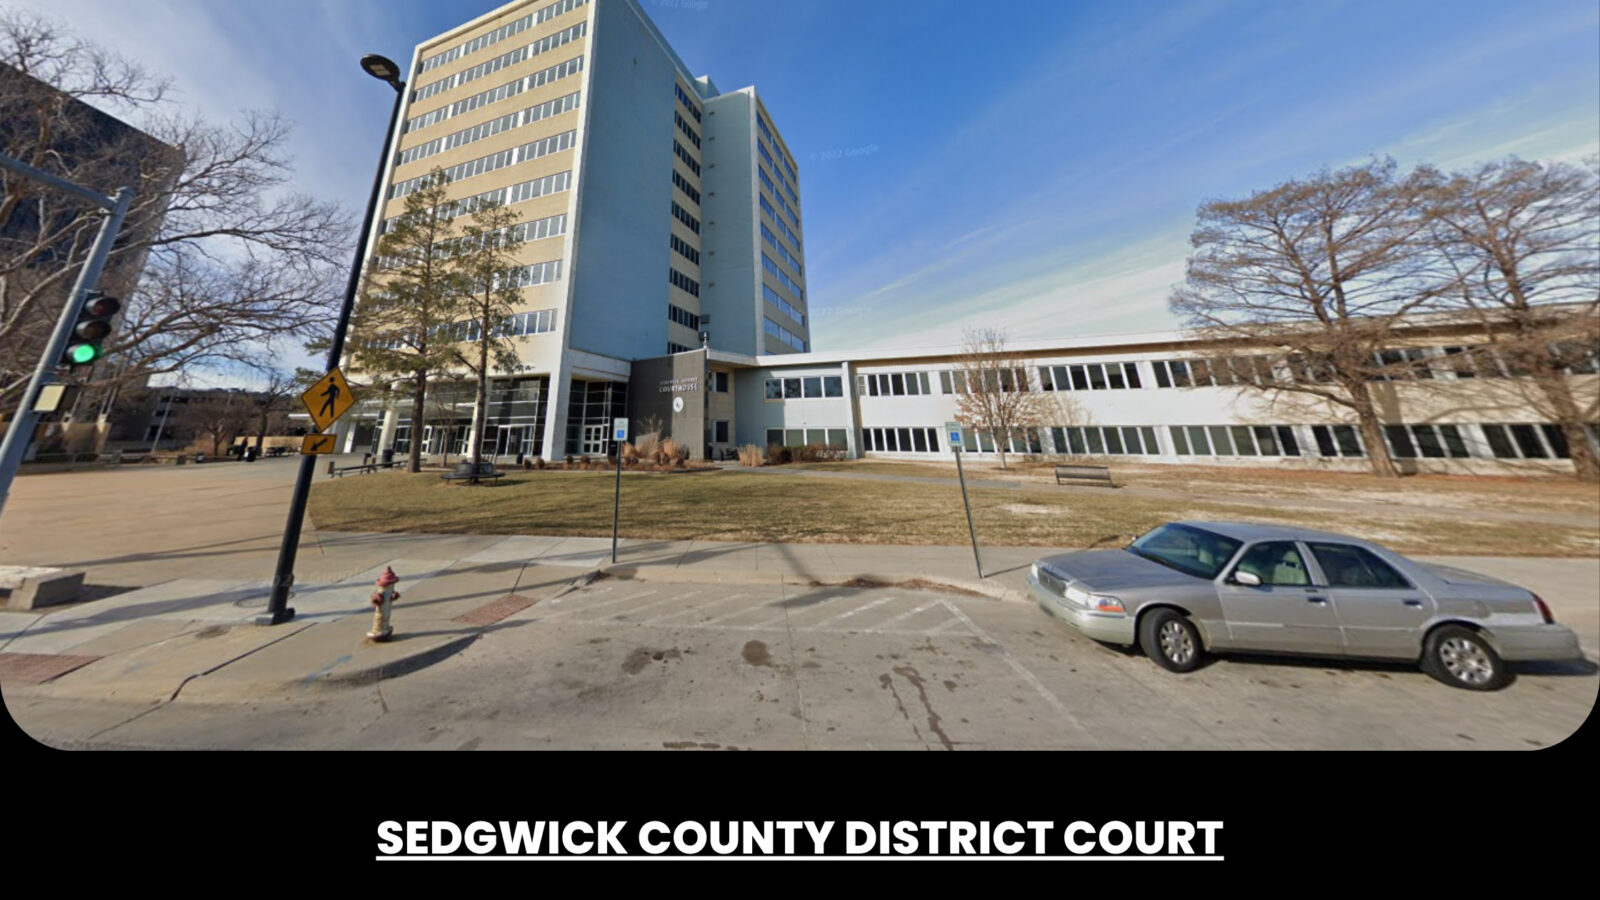 Sedgwick County District Court